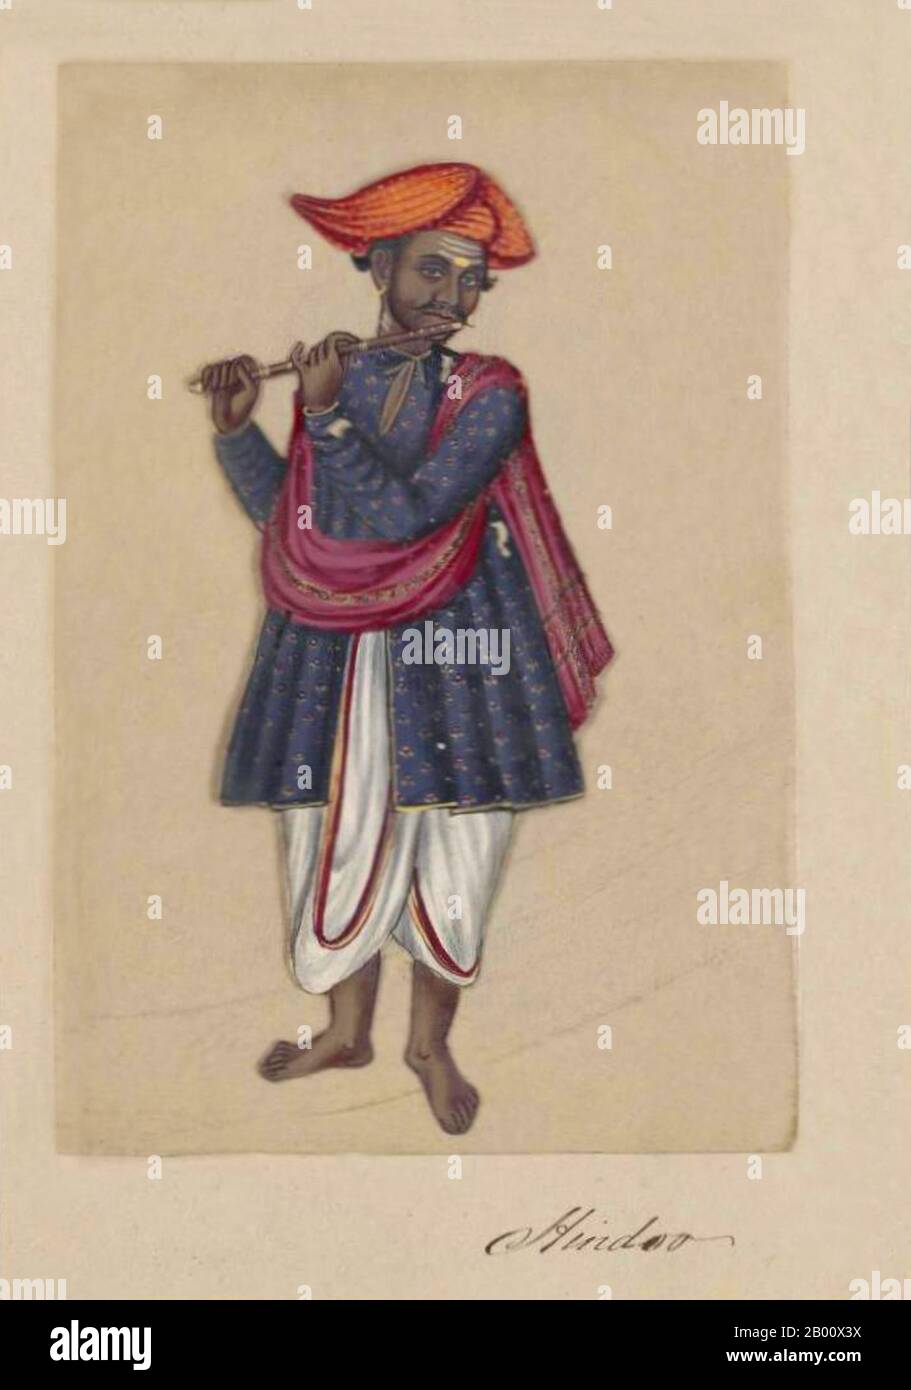 India: 'Hindoo/Hindu Flautist'. Hand-colored image painted on a thin sheet of mica from a manuscript entitled: ‘Seventy-Two Specimens of Caste in India’ (Madura, southern India: 1837).  The full book consists of 72 full-color hand-painted images of men and women of the various castes and religious and ethnic groups found in Madura, Tamil Nadu, at that time. The manuscript shows Indian dress and jewelry adornment in the Madura region as they appeared before the onset of Western influences on South Asian dress and style. Each illustrated portrait is captioned in English and in Tamil. Stock Photo